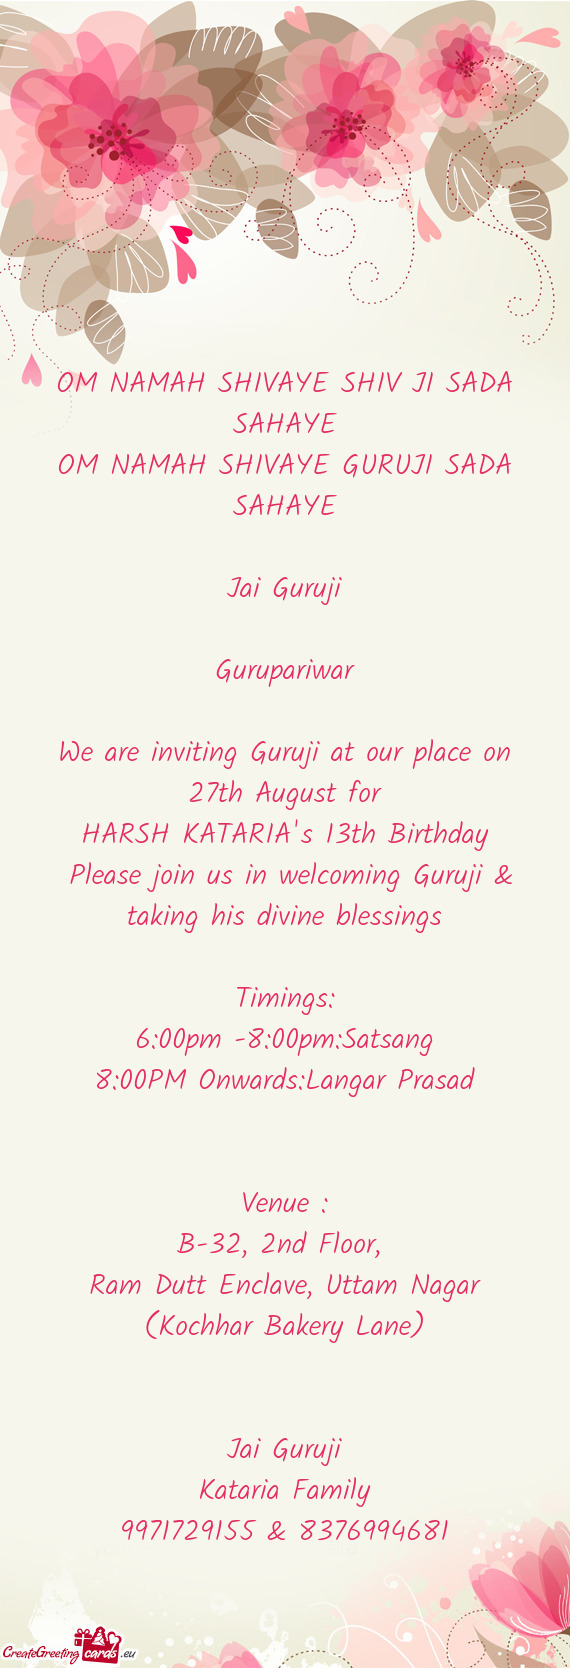 We are inviting Guruji at our place on 27th August for